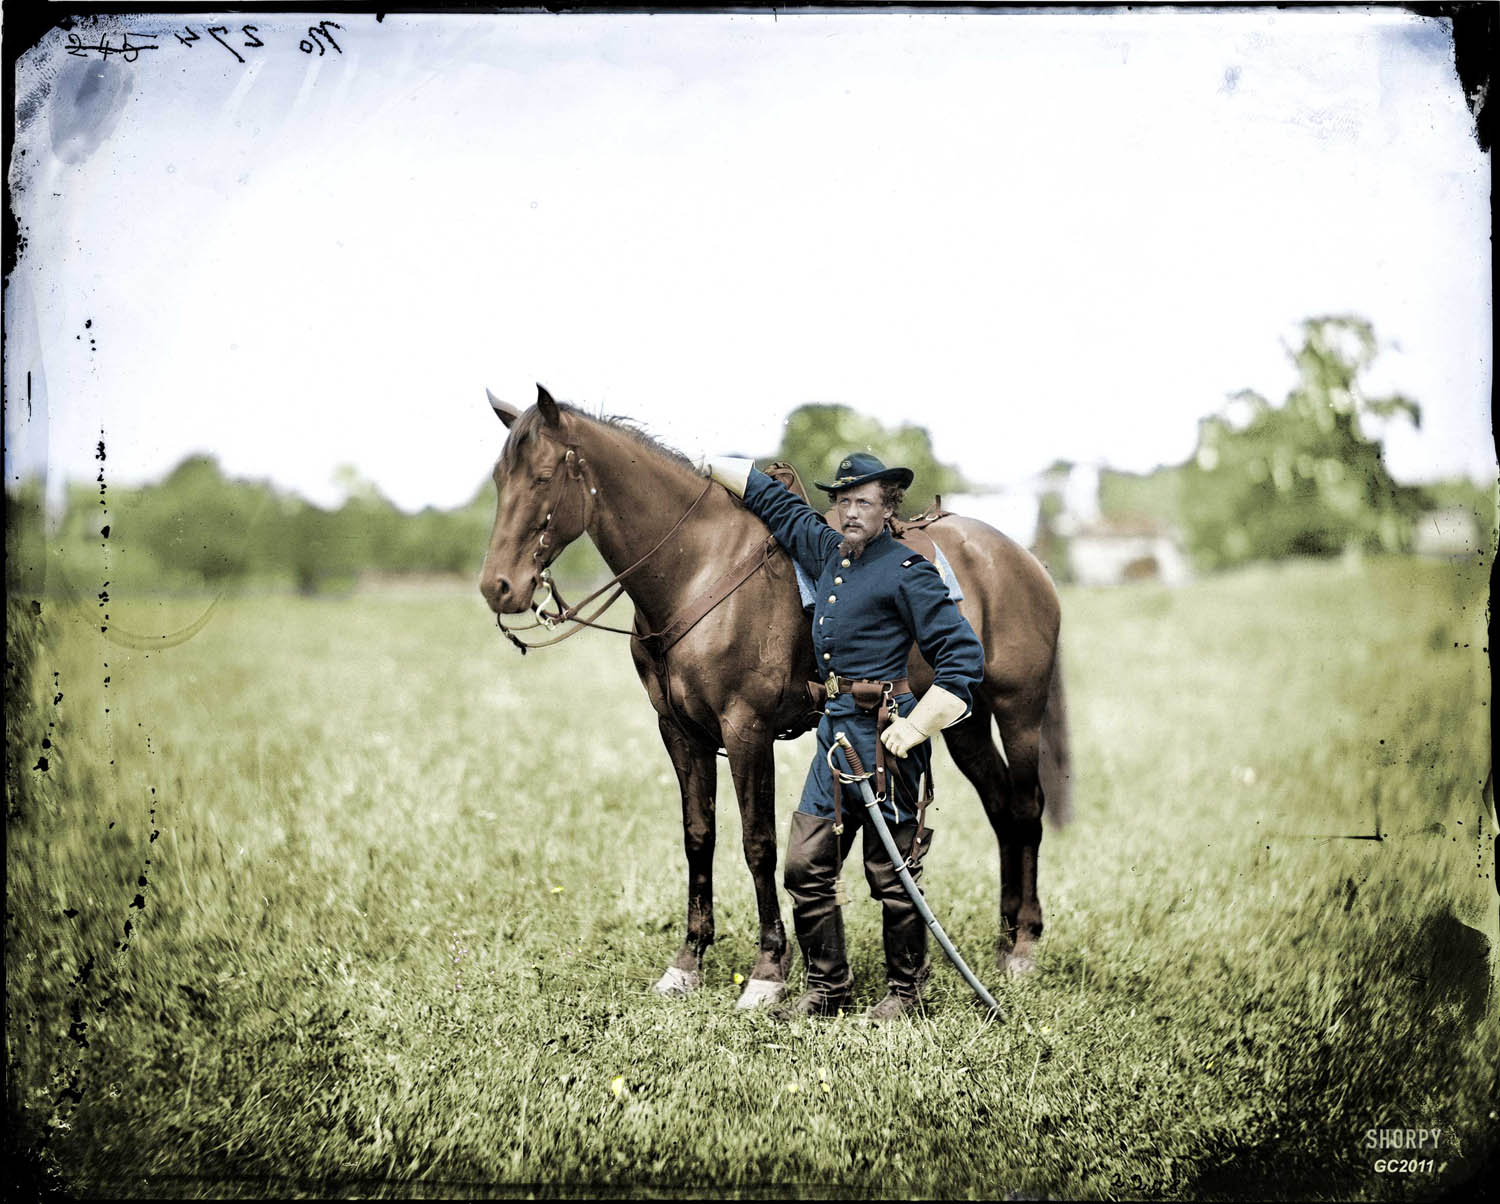 Colourised version of Captain Henry Page at Bealeton, Va in August 1863. View full size.